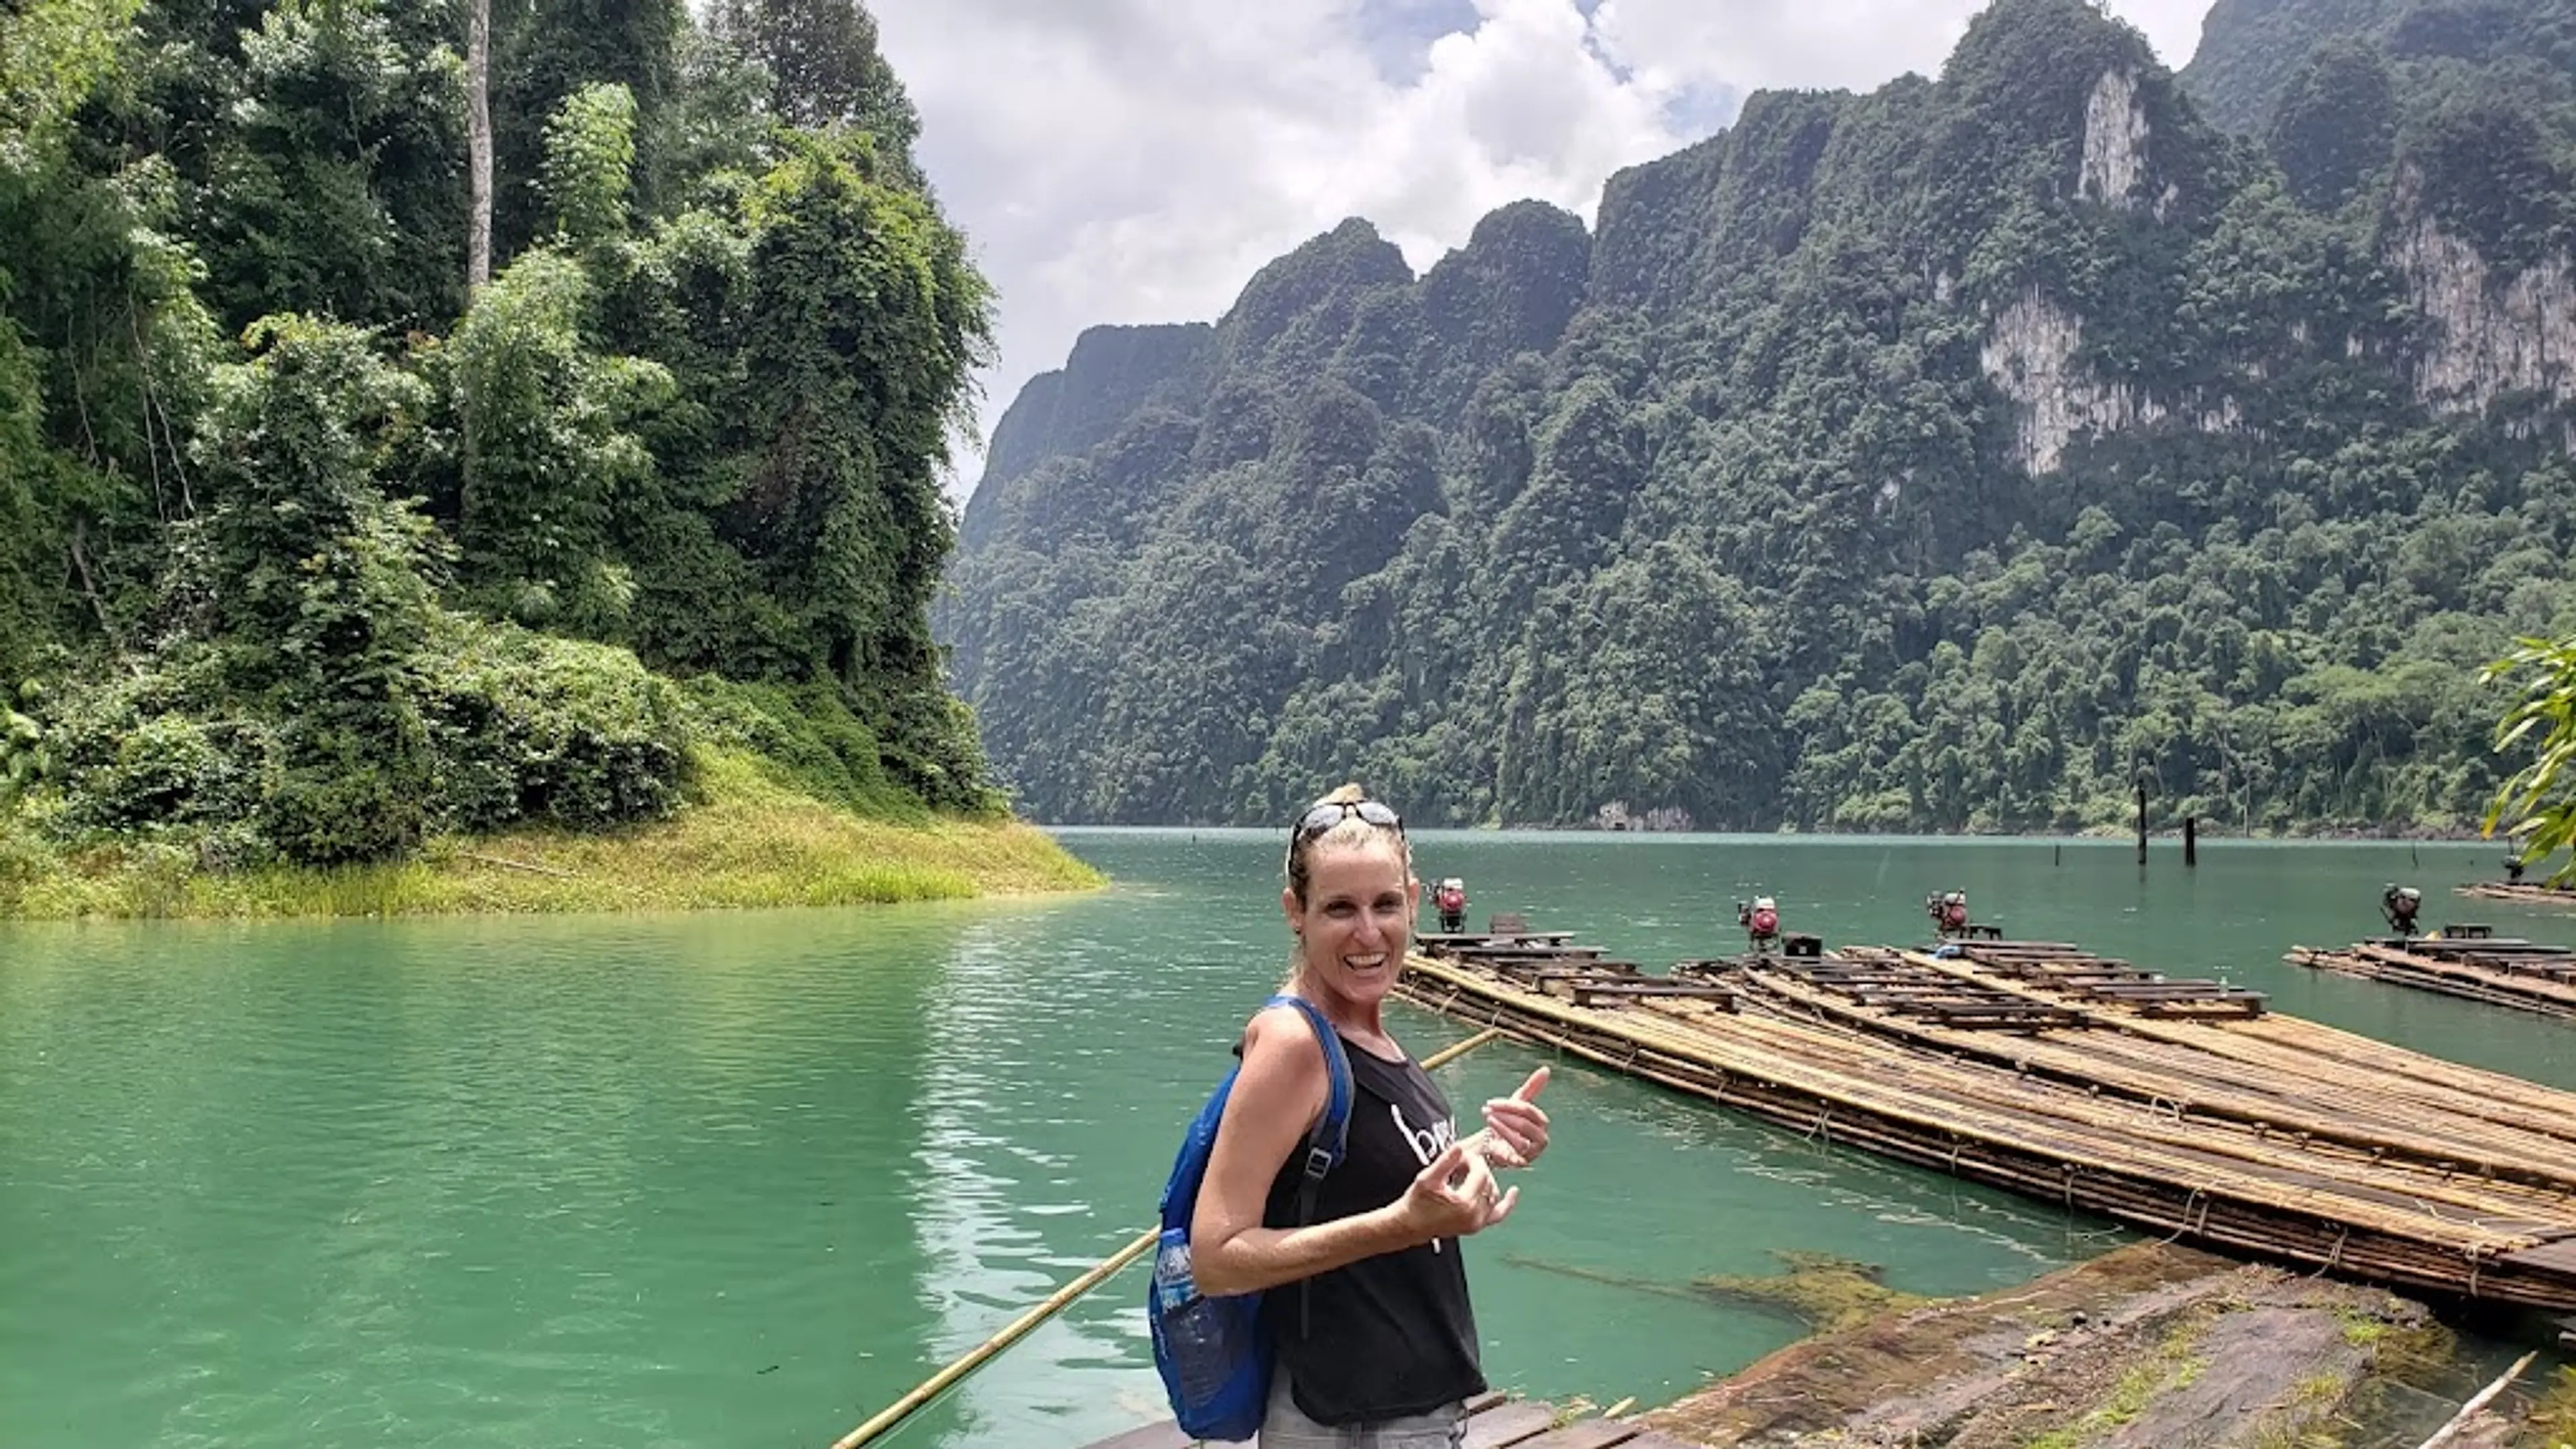 Guided tour of Khao Sok National Park